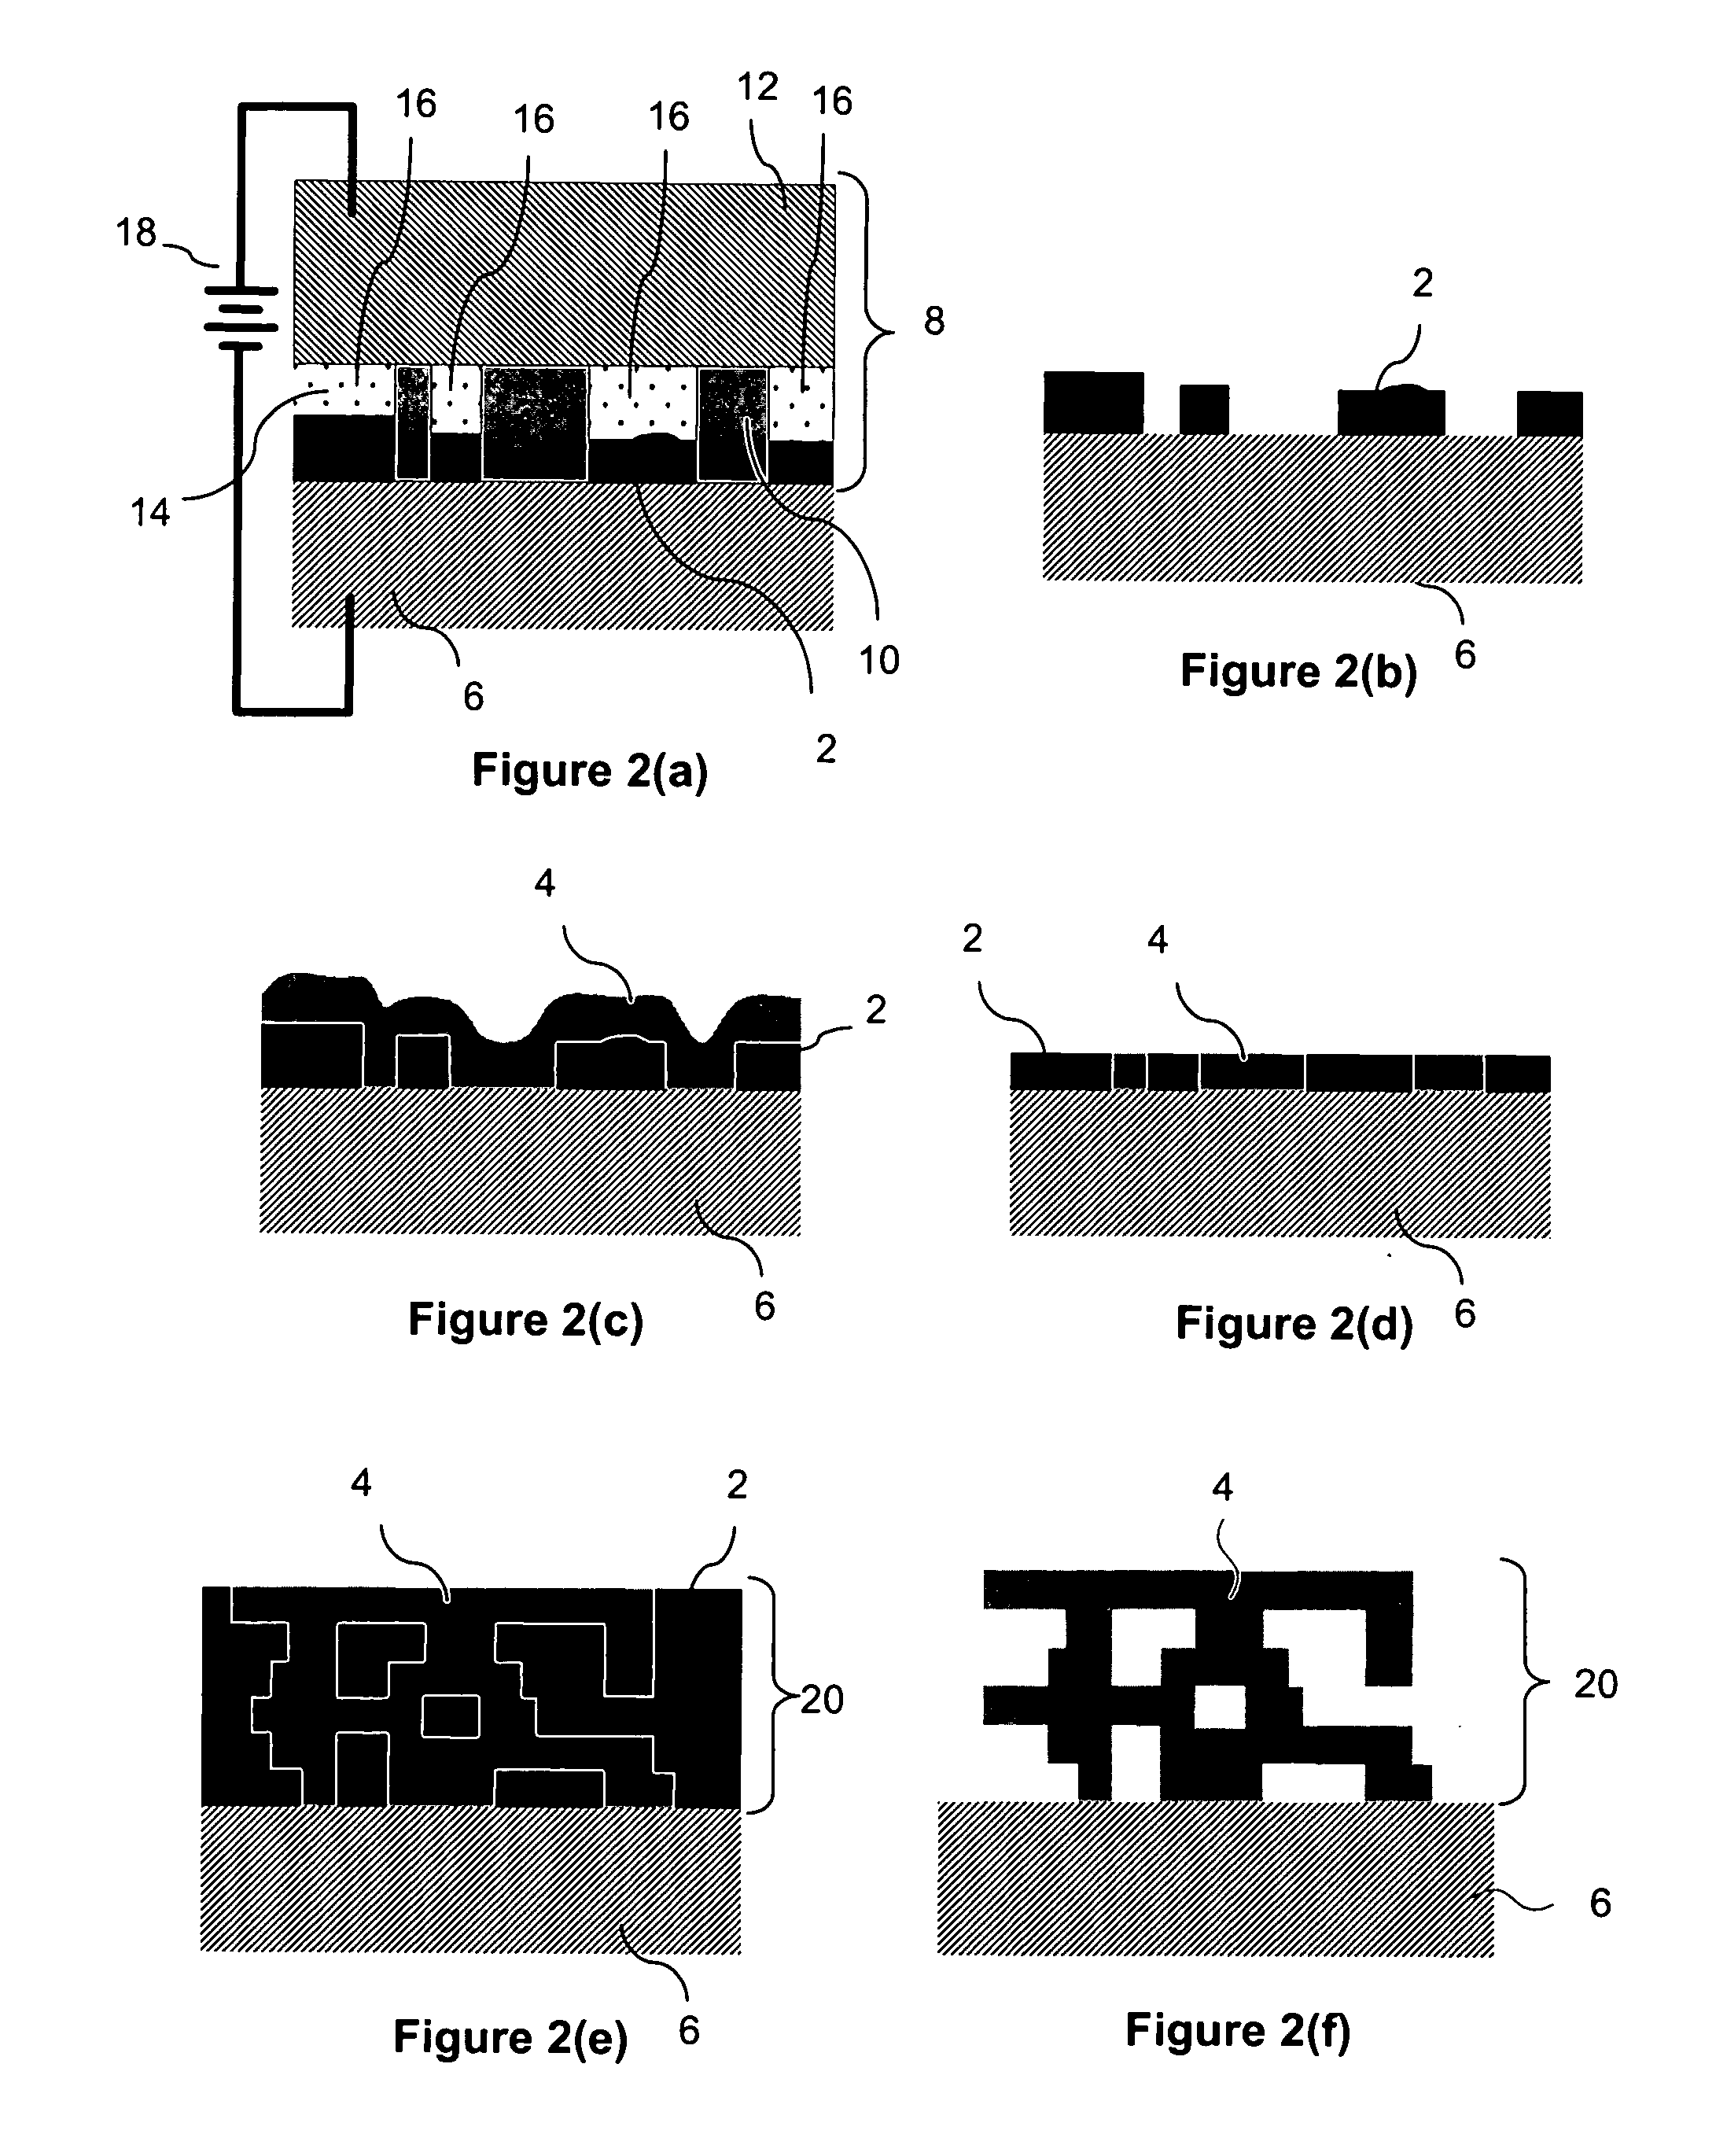 Electrochemical fabrication process using directly patterned masks